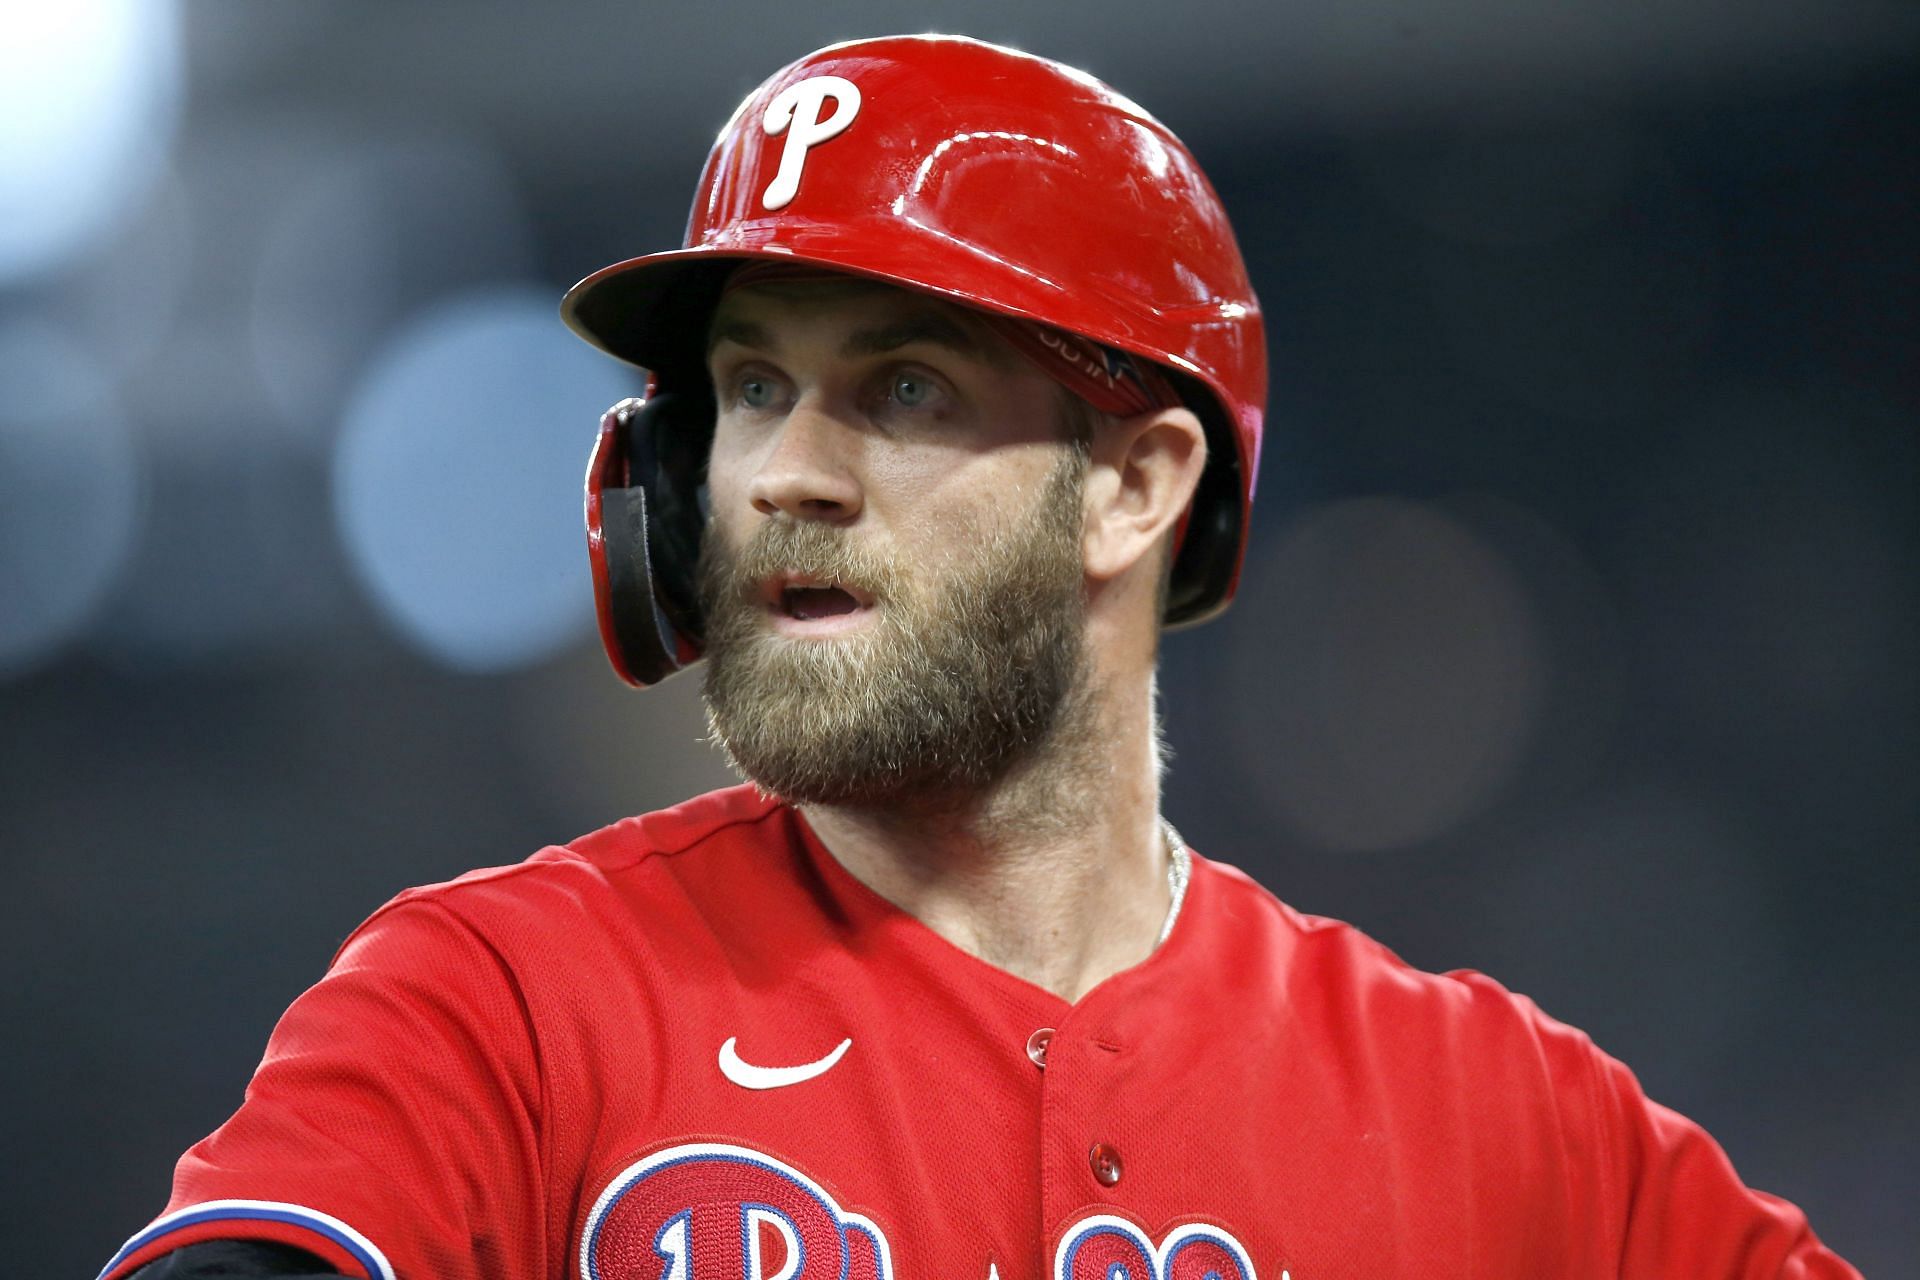 Phillies outfielder Bryce Harper hit .318 before fracturing a finger in June